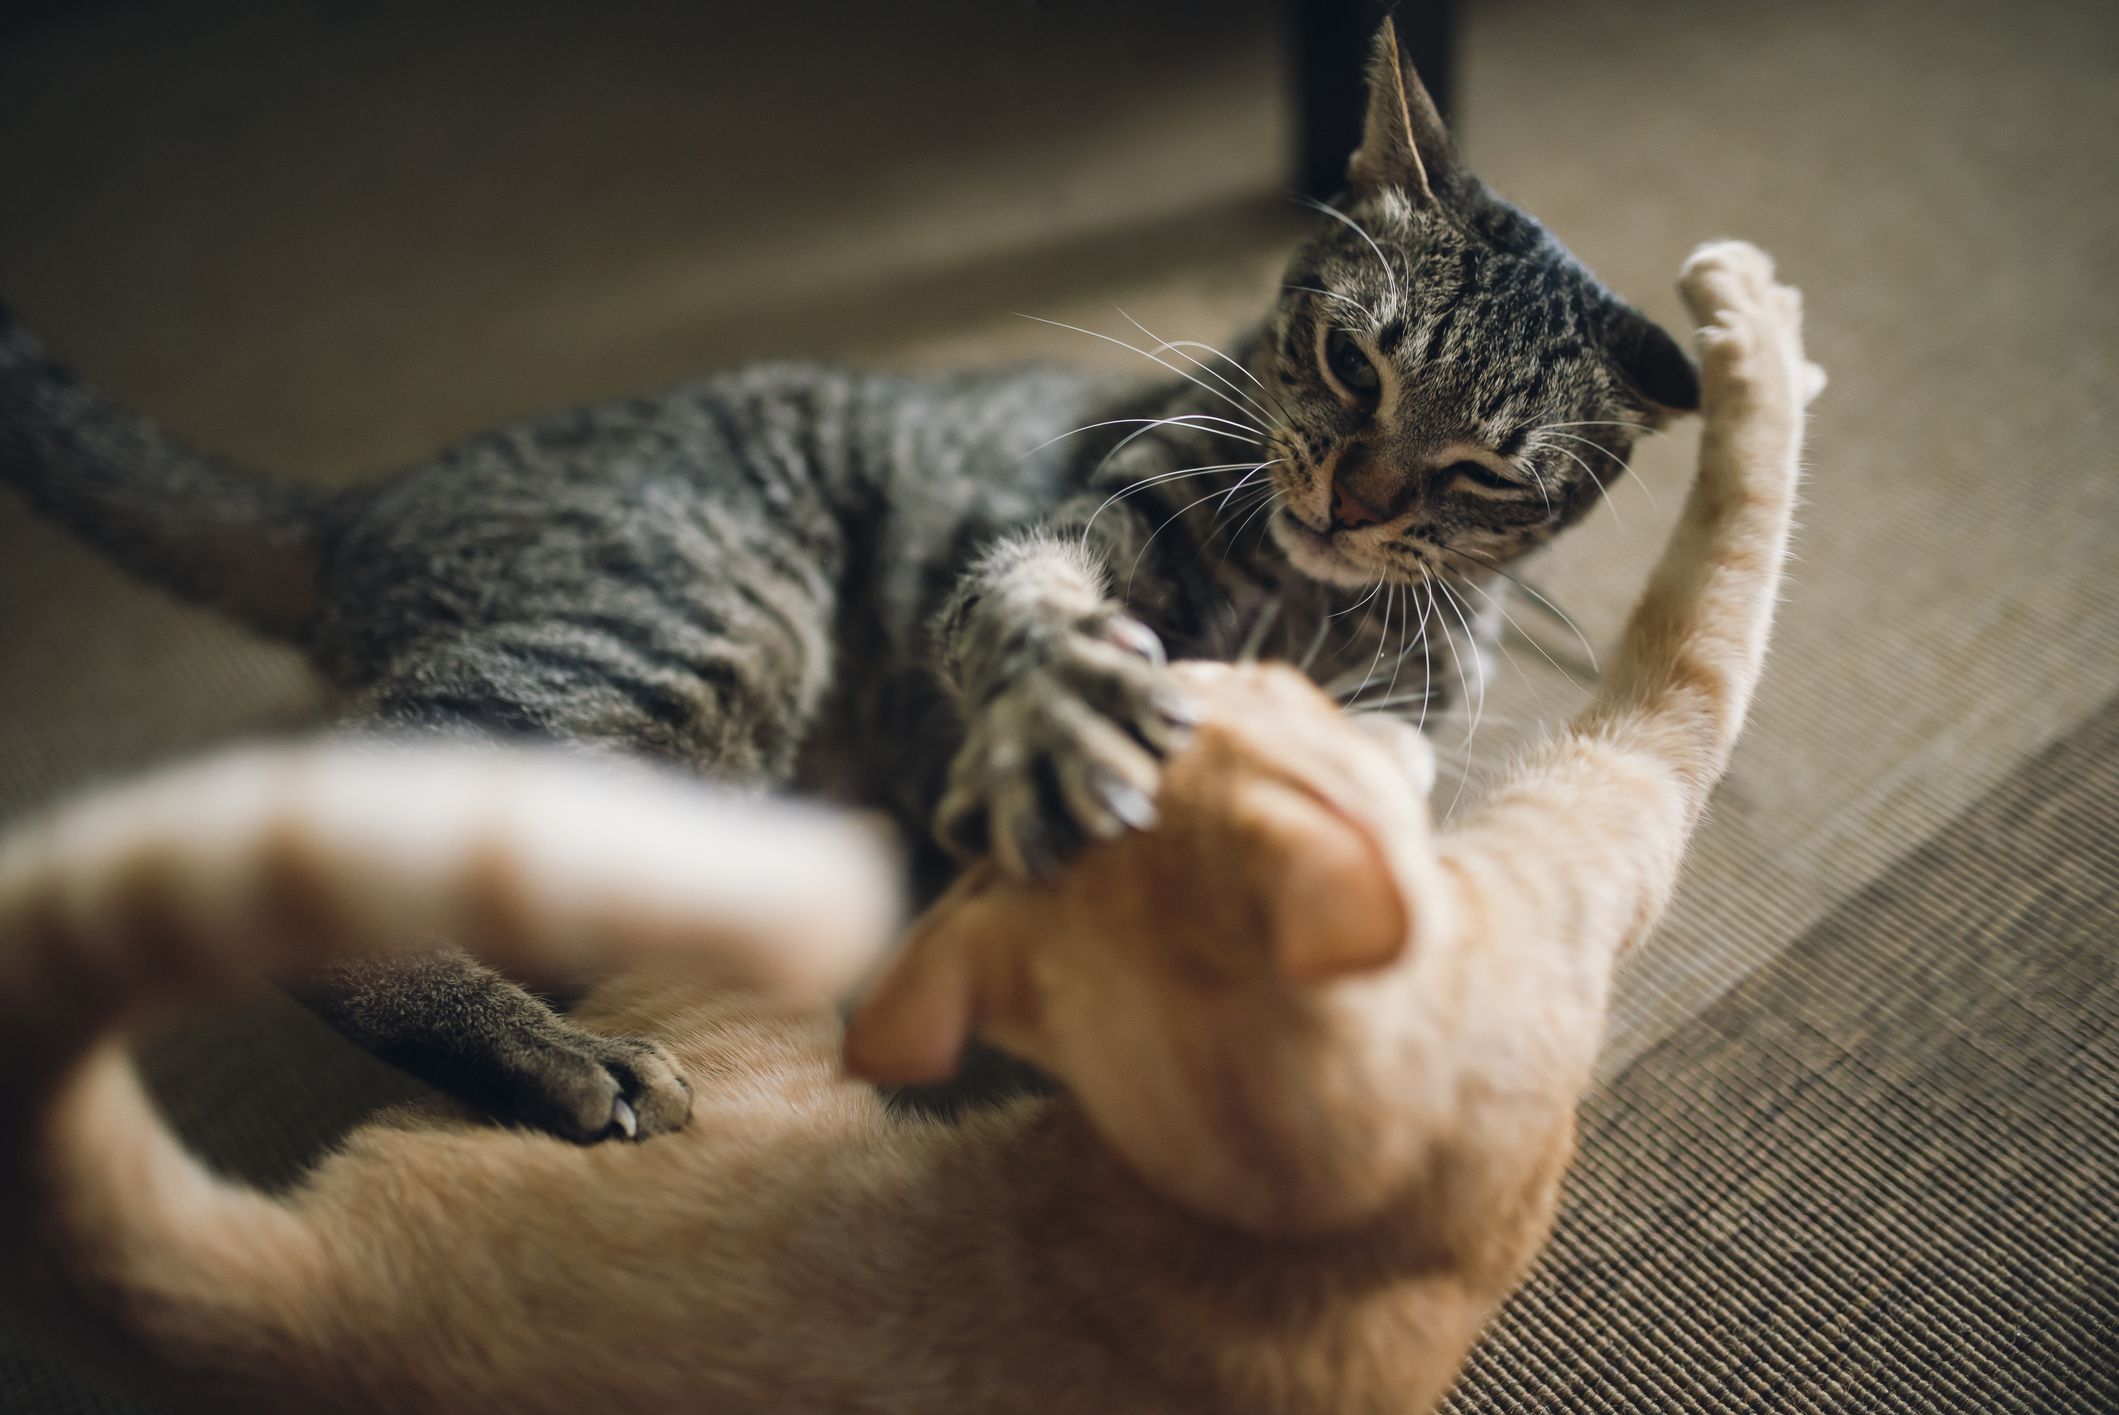 Cats-fighting-GettyImages-589937801-58b394a93df78cdcd8103760.jpg